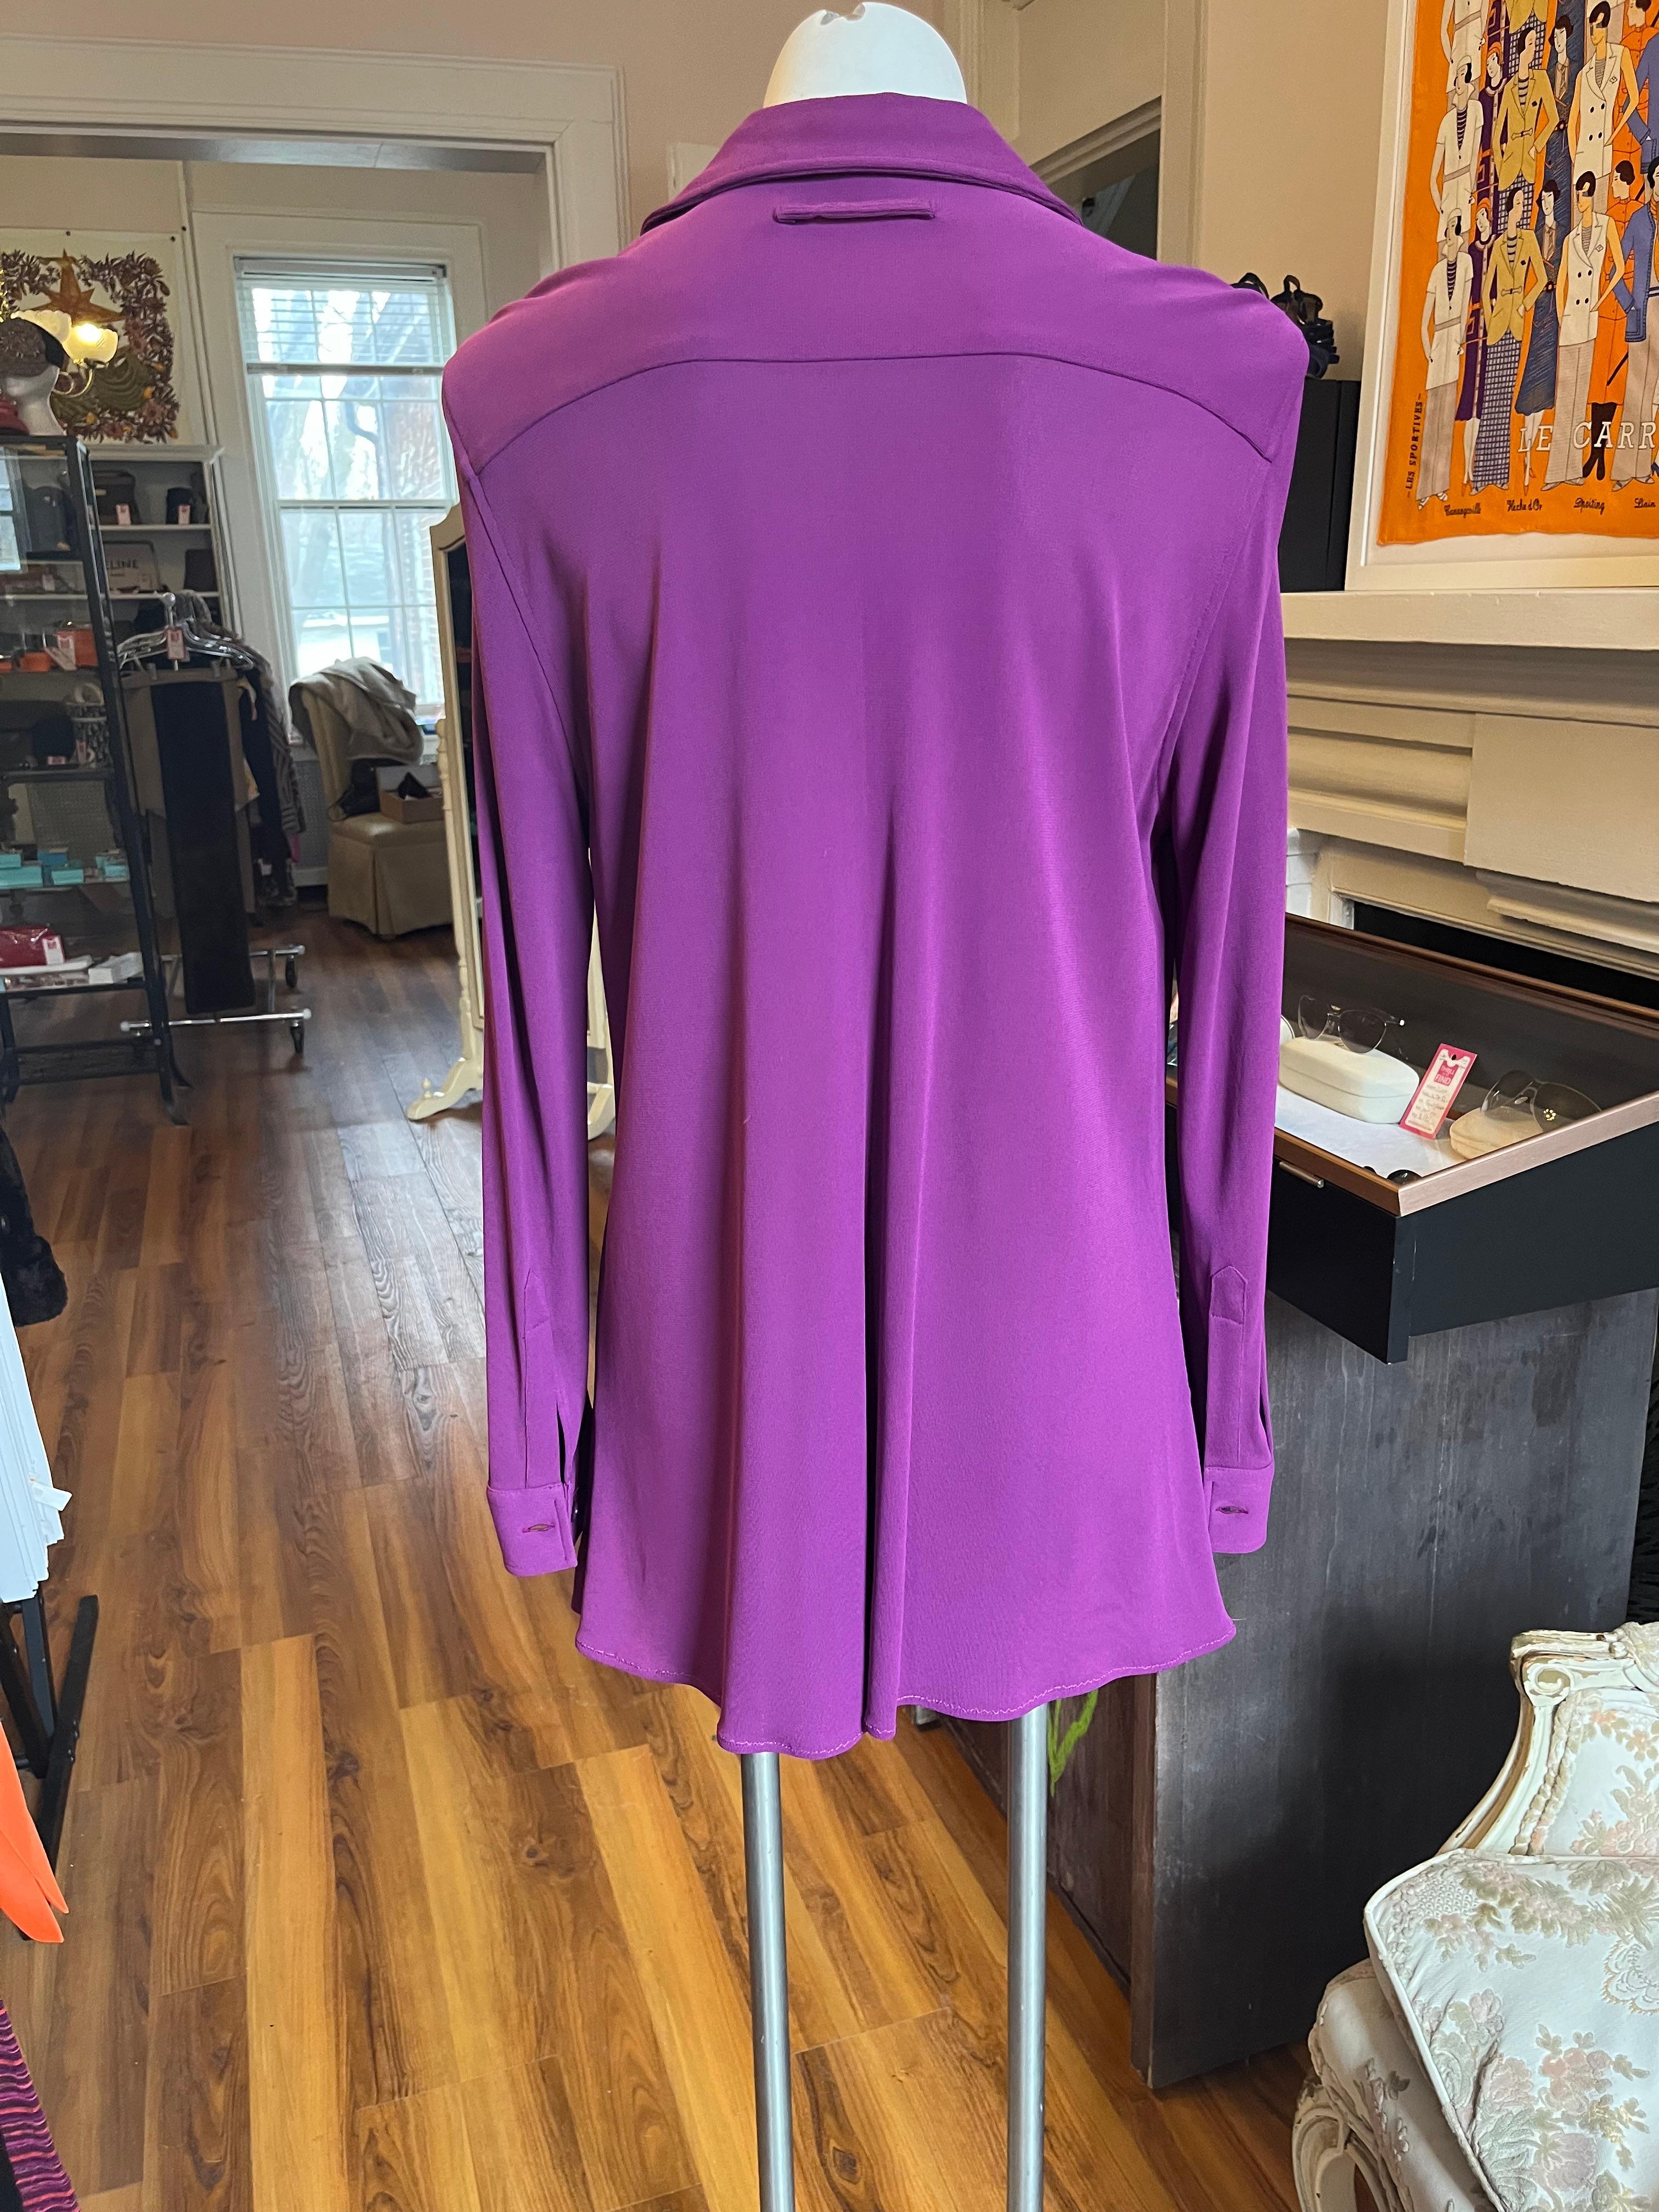 Jean Paul Gaultier Femme Purple Tunic In Good Condition For Sale In Port Hope, ON